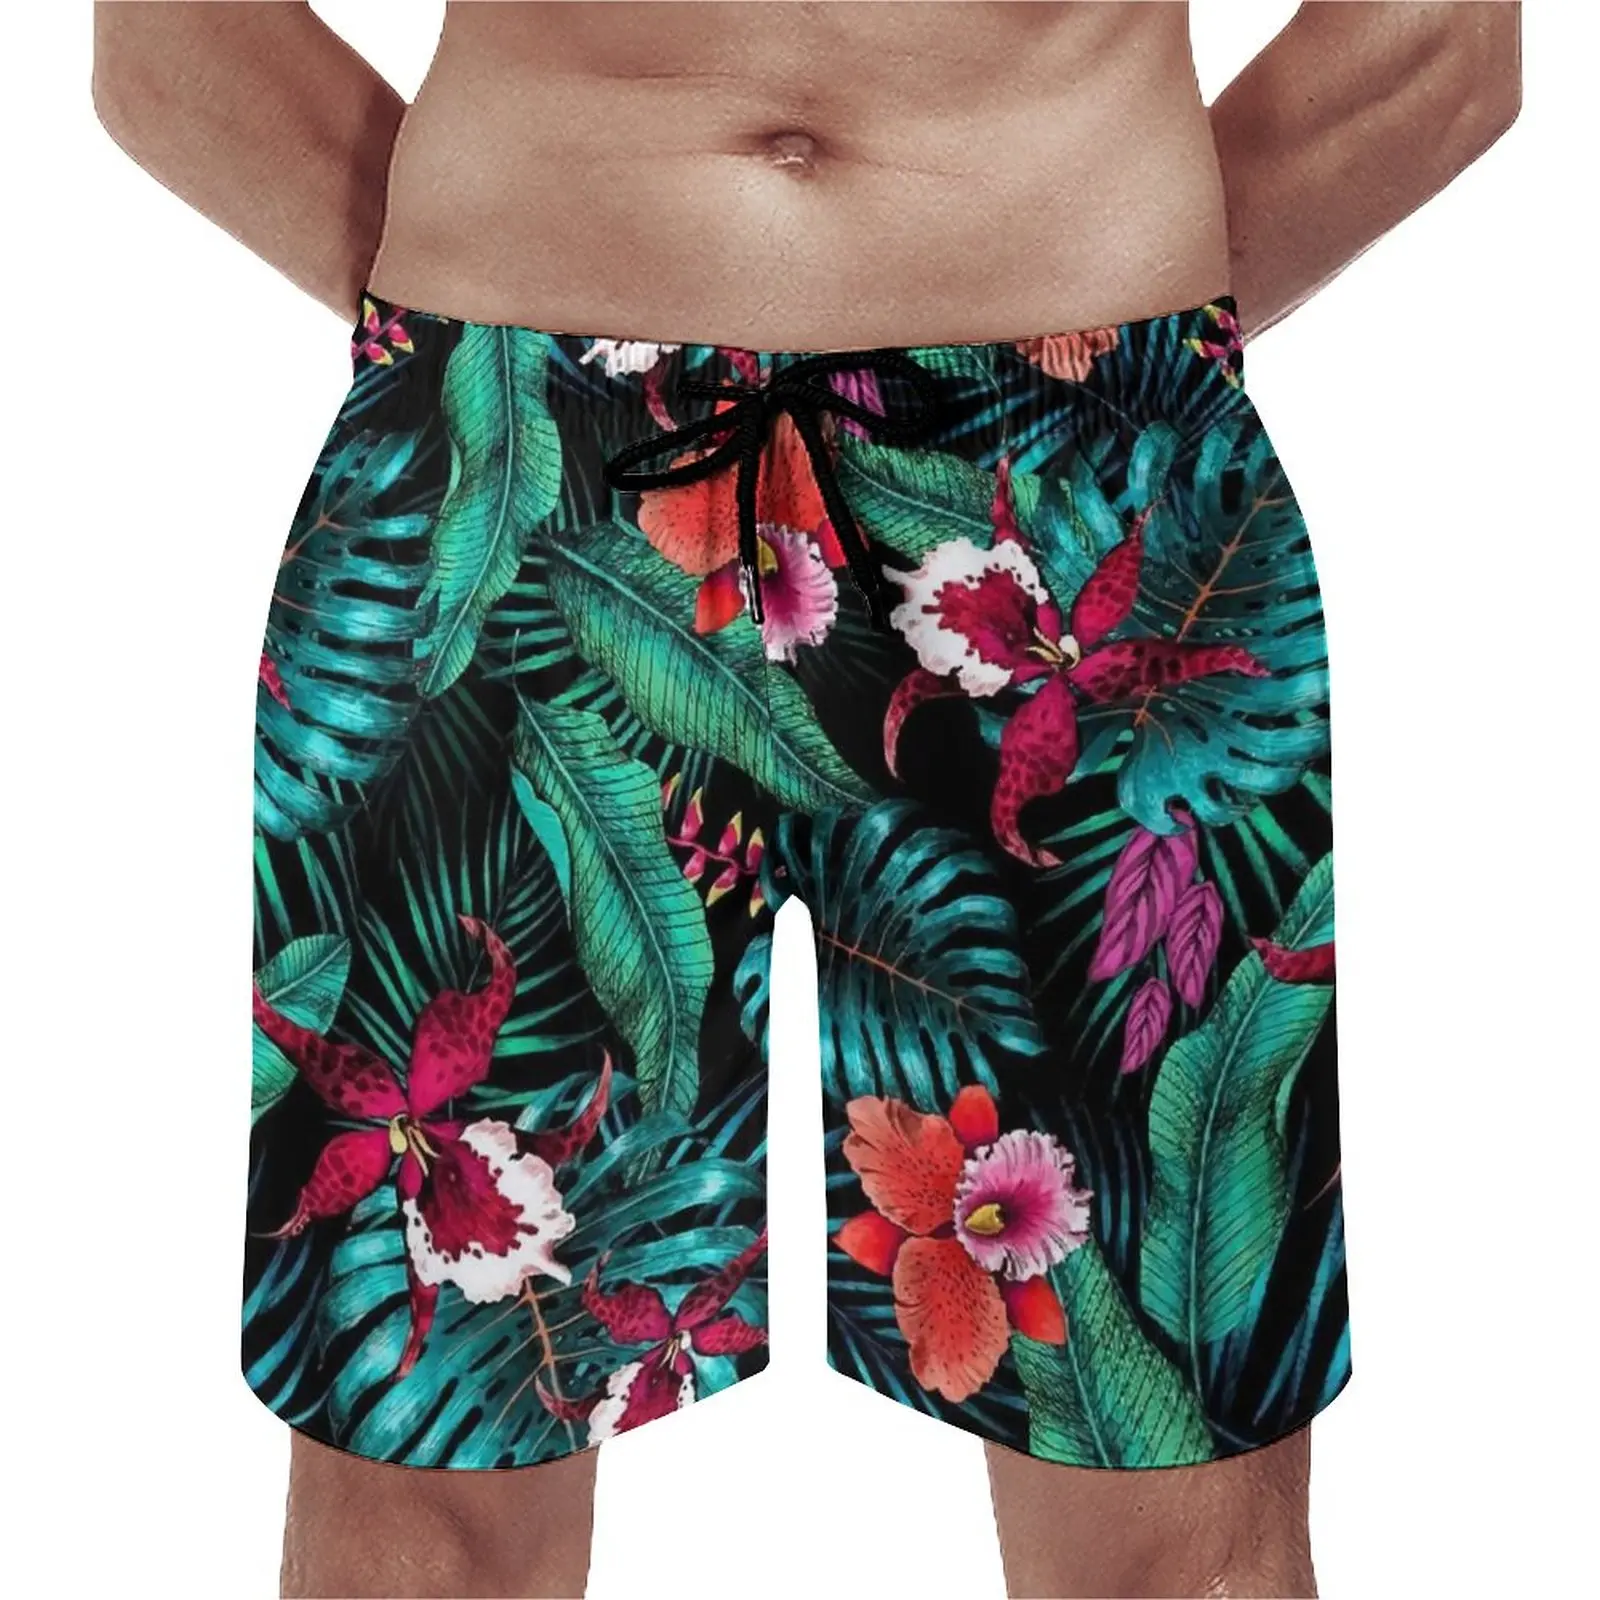 

Palm Leaves Green Board Shorts Floral Print Casual Beach Short Pants Males Design Sports Surf Quick Dry Swim Trunks Gift Idea